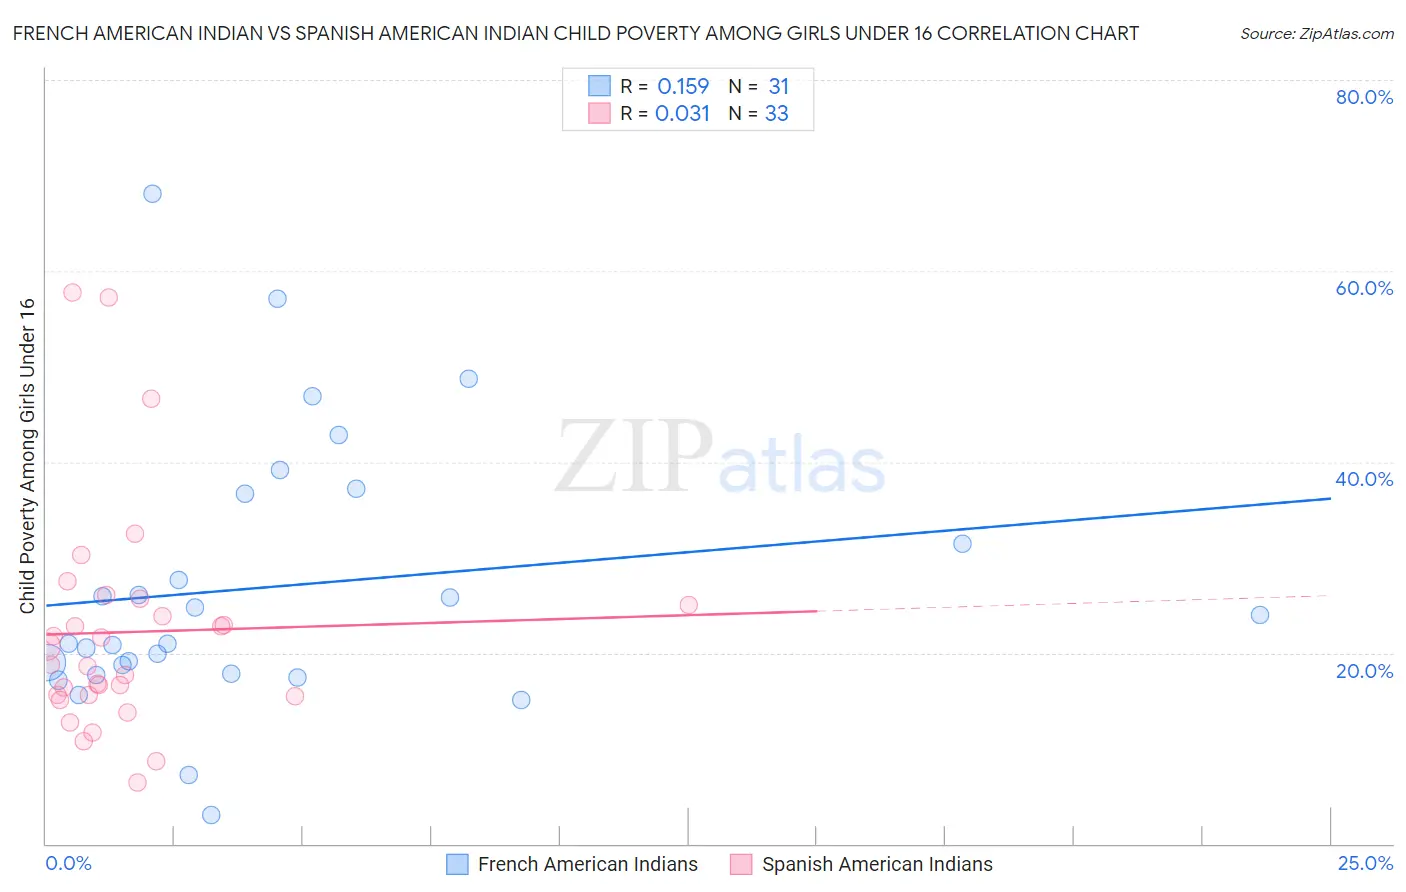 French American Indian vs Spanish American Indian Child Poverty Among Girls Under 16